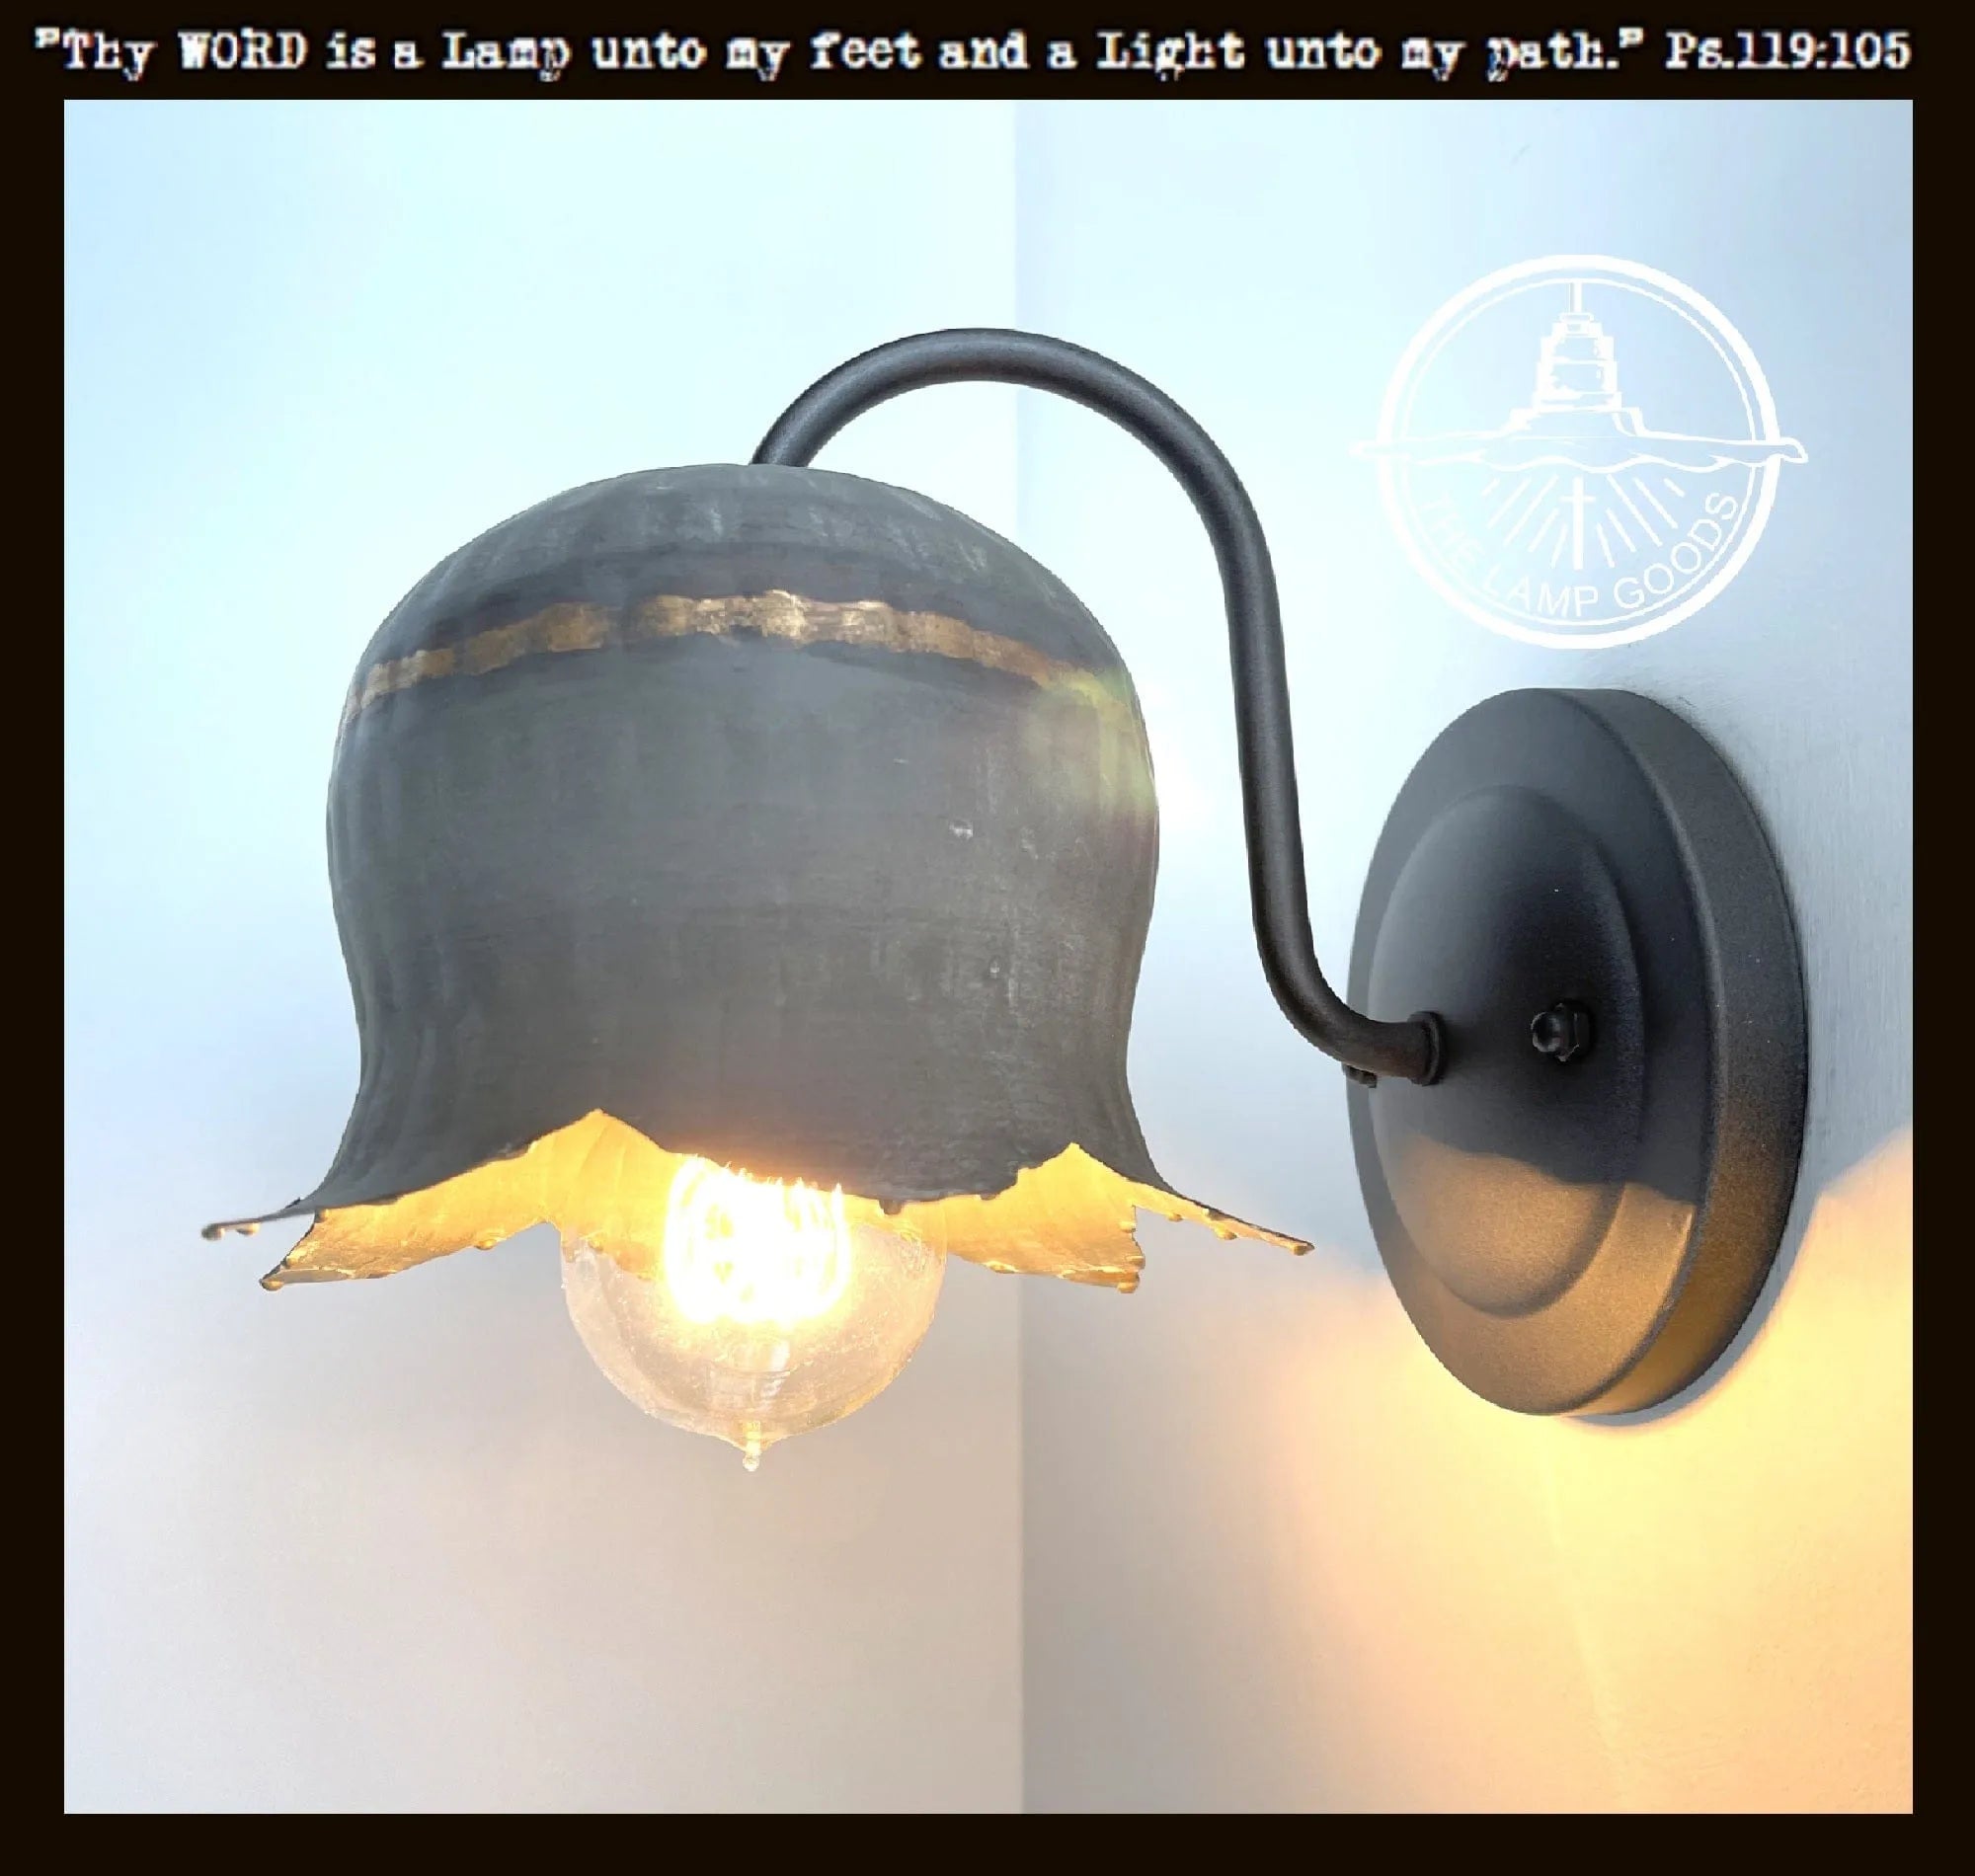 Galvanized Farmhouse Wall Sconce Light Lotus Collection The Lamp Goods